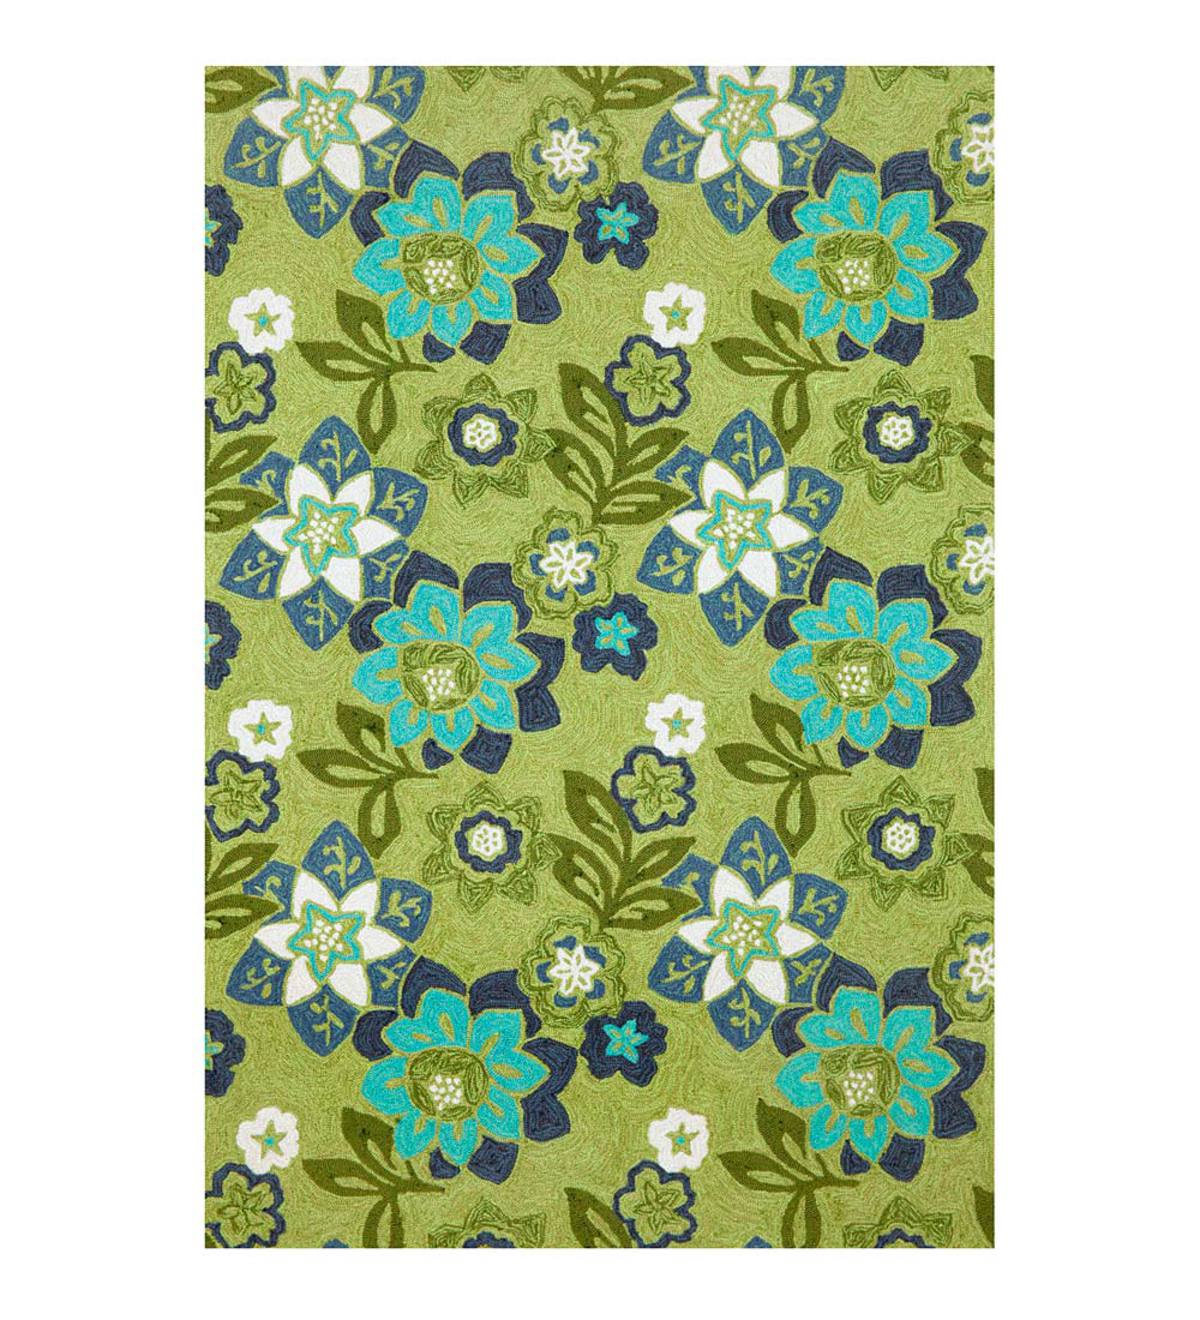 Blue and Green Floral Runner, 24"W x 8'L - Green